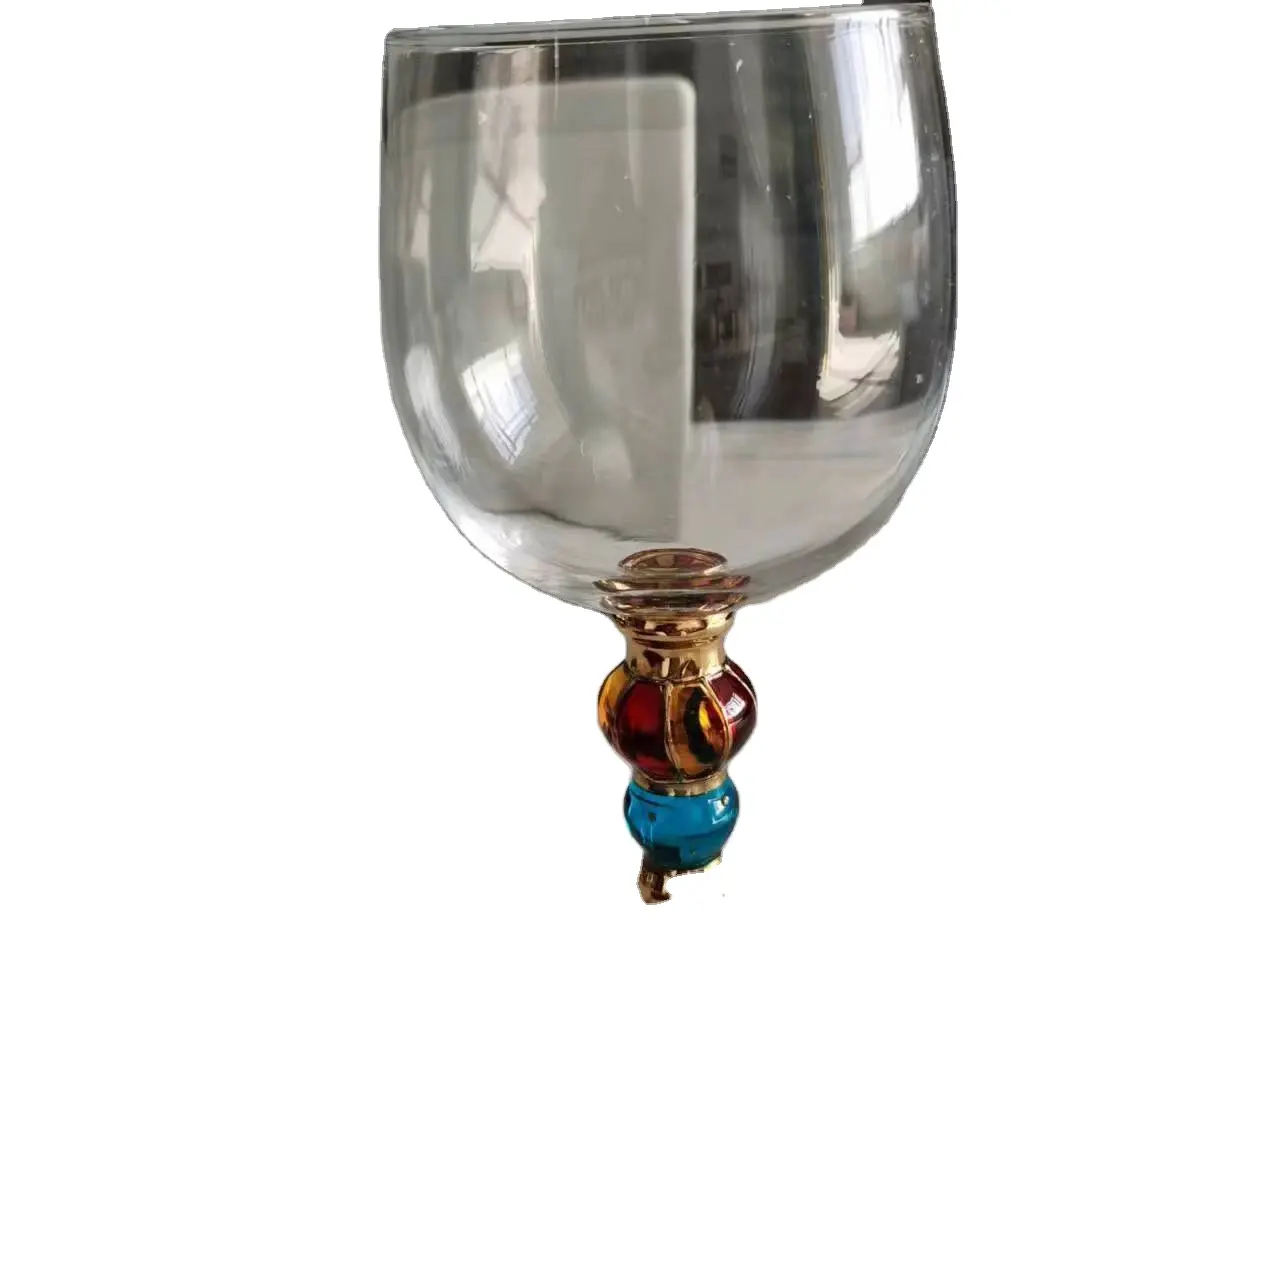 Super March Hot Sale Specially Designed Wine Glass Gift Set With Movie Theme A Box Of 4